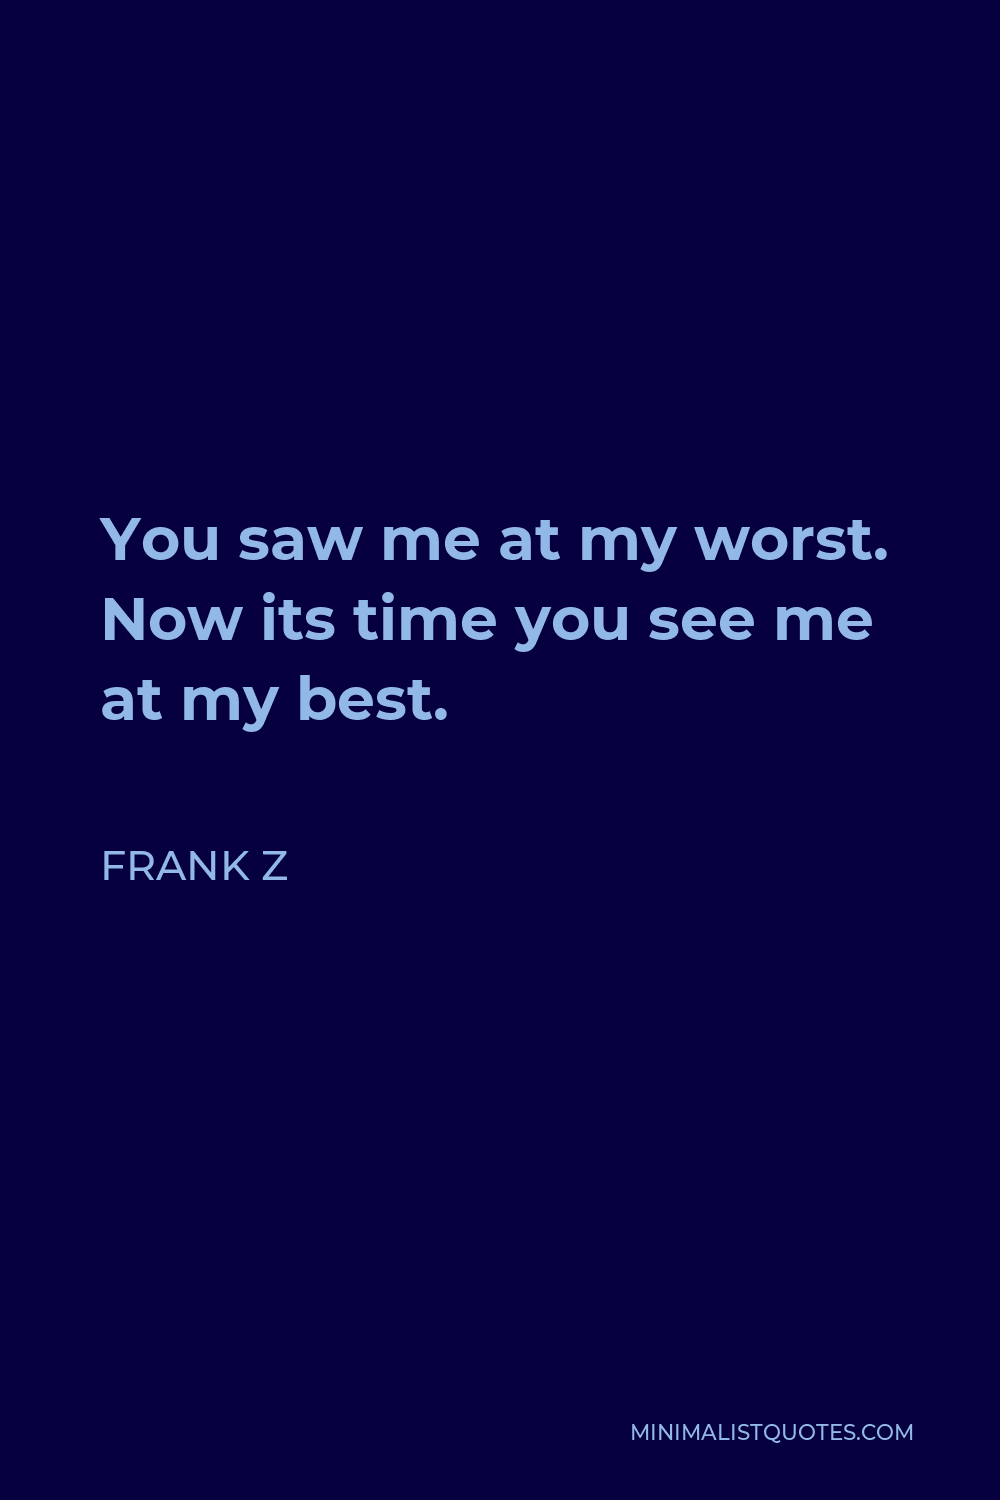 Frank Z Quote - You saw me at my worst. Now its time you see me at my best.